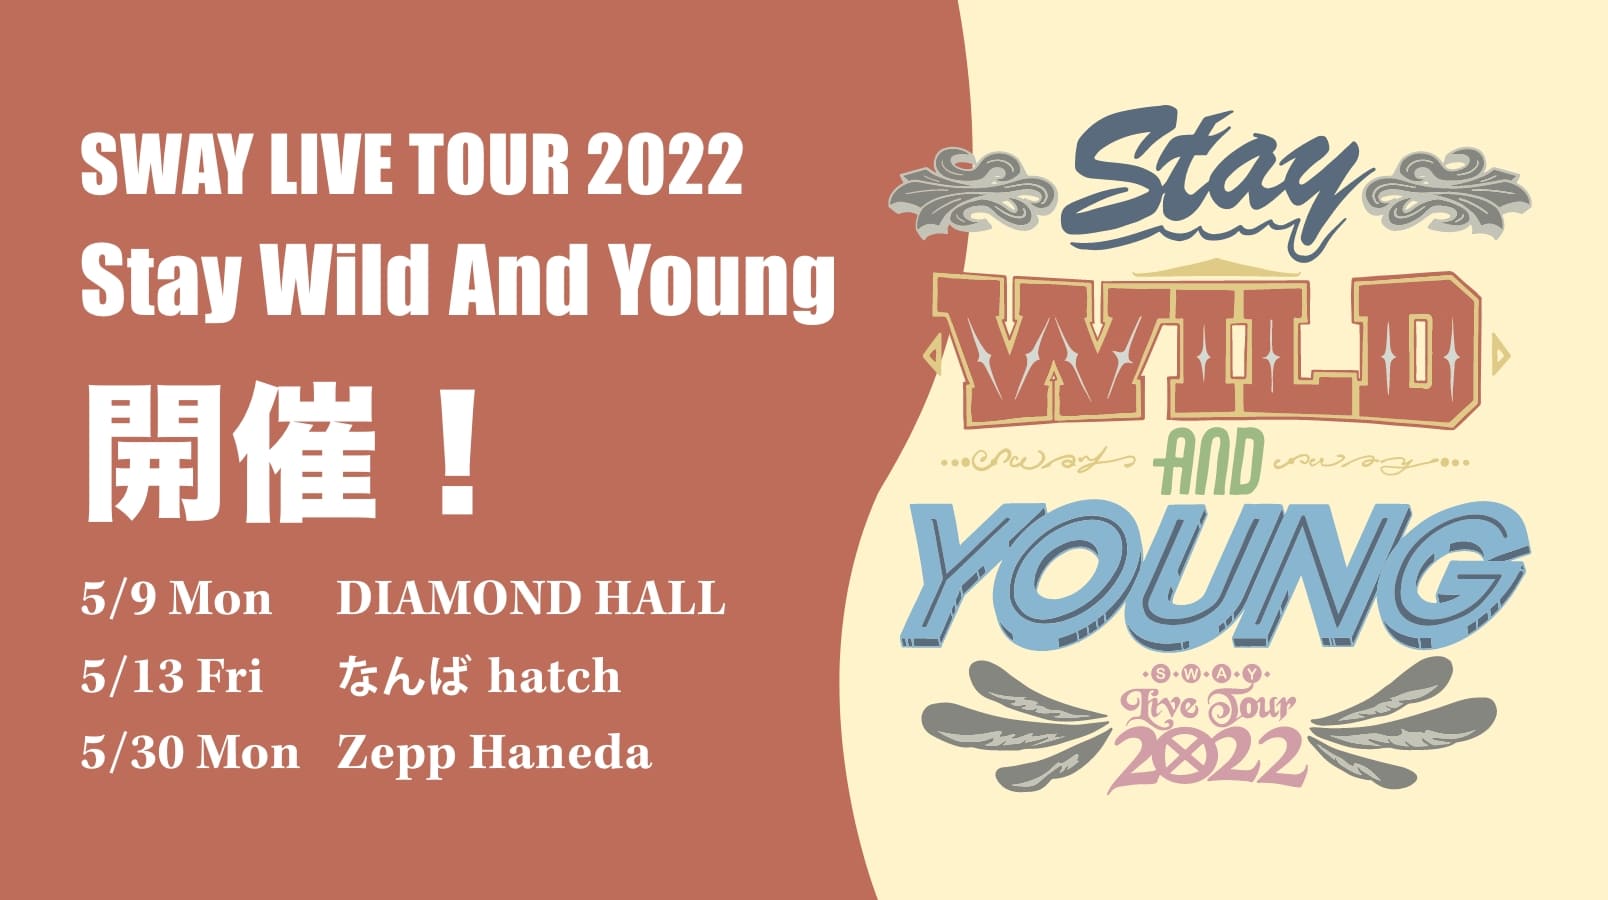 「SWAY LIVE TOUR 2022 ”Stay Wild And Young”」開催!!